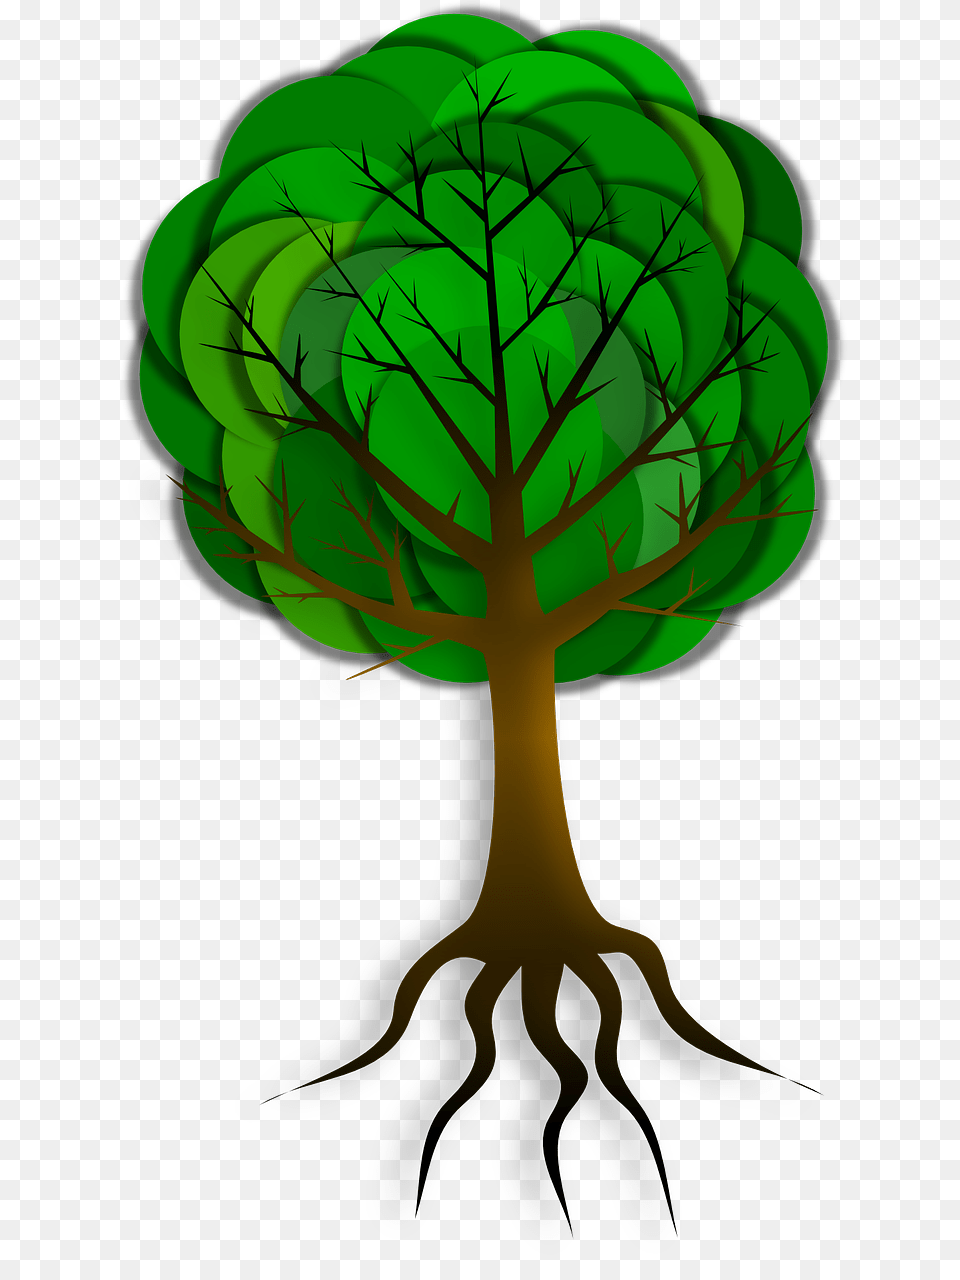 Tree Branches Roots Skeleton Image Tree, Green, Leaf, Plant Free Transparent Png